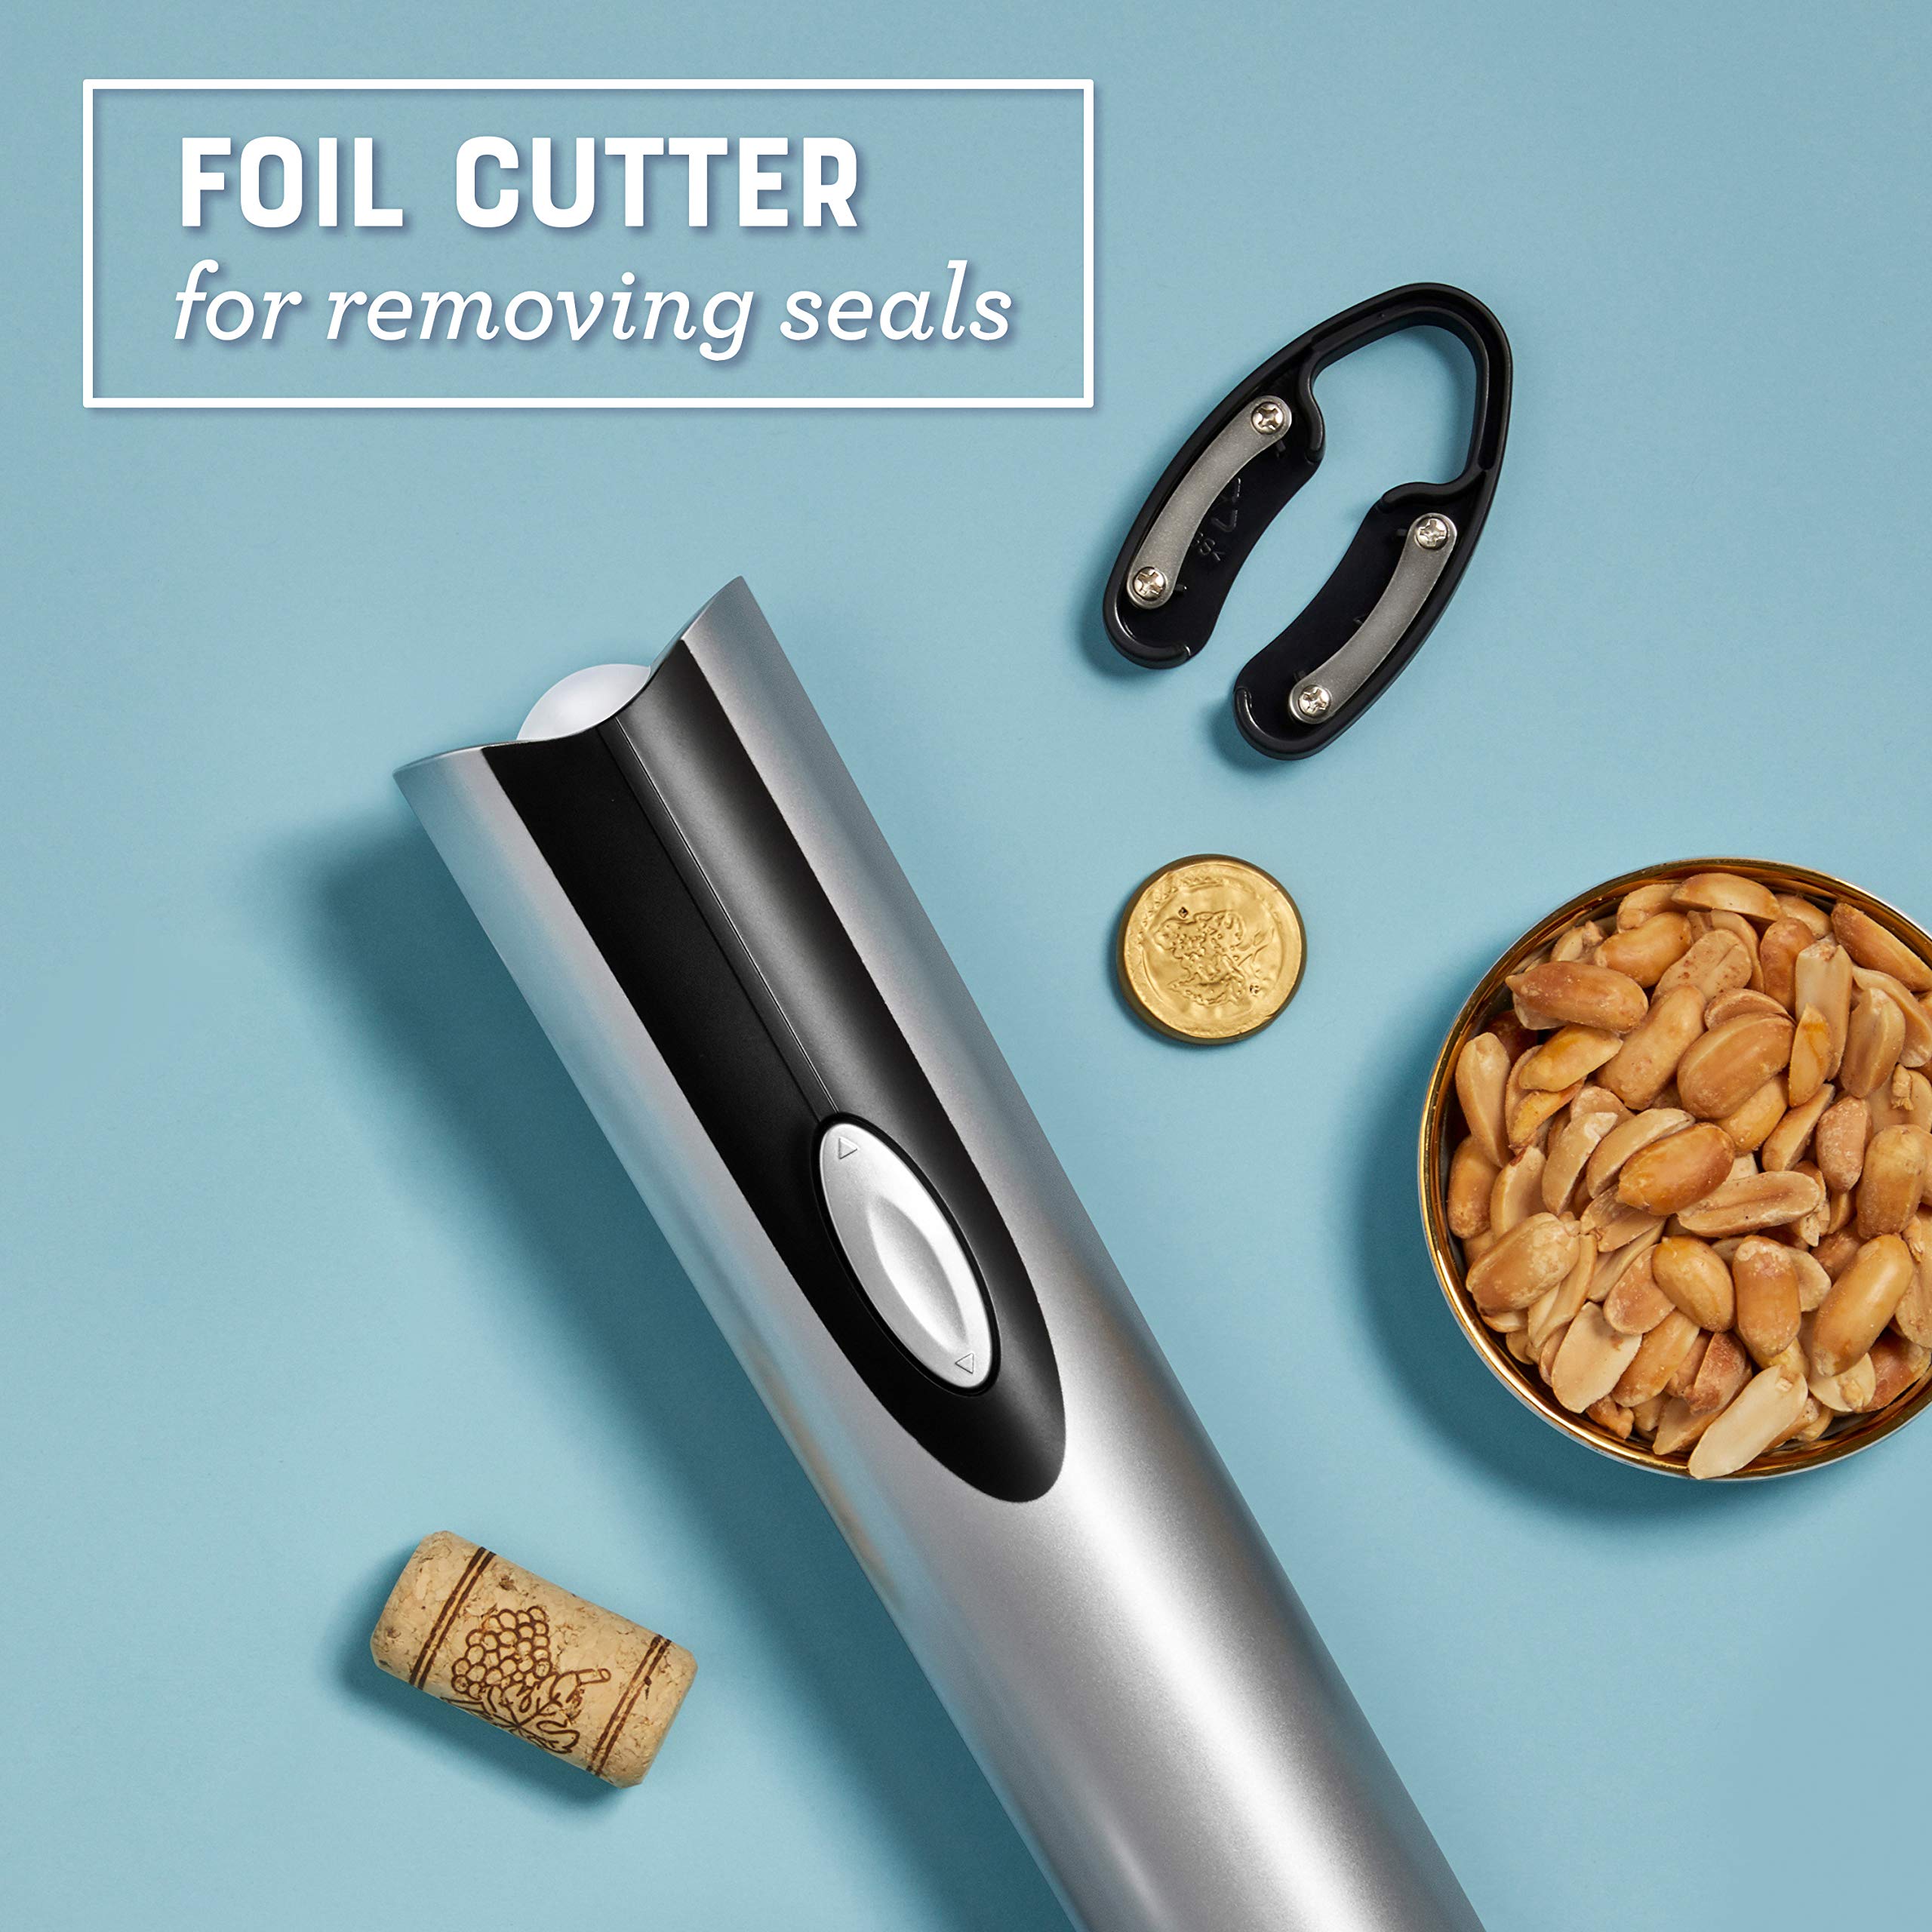 Oster Electric Wine Opener and Foil Cutter Kit with CorkScrew and Charging Base, Silver